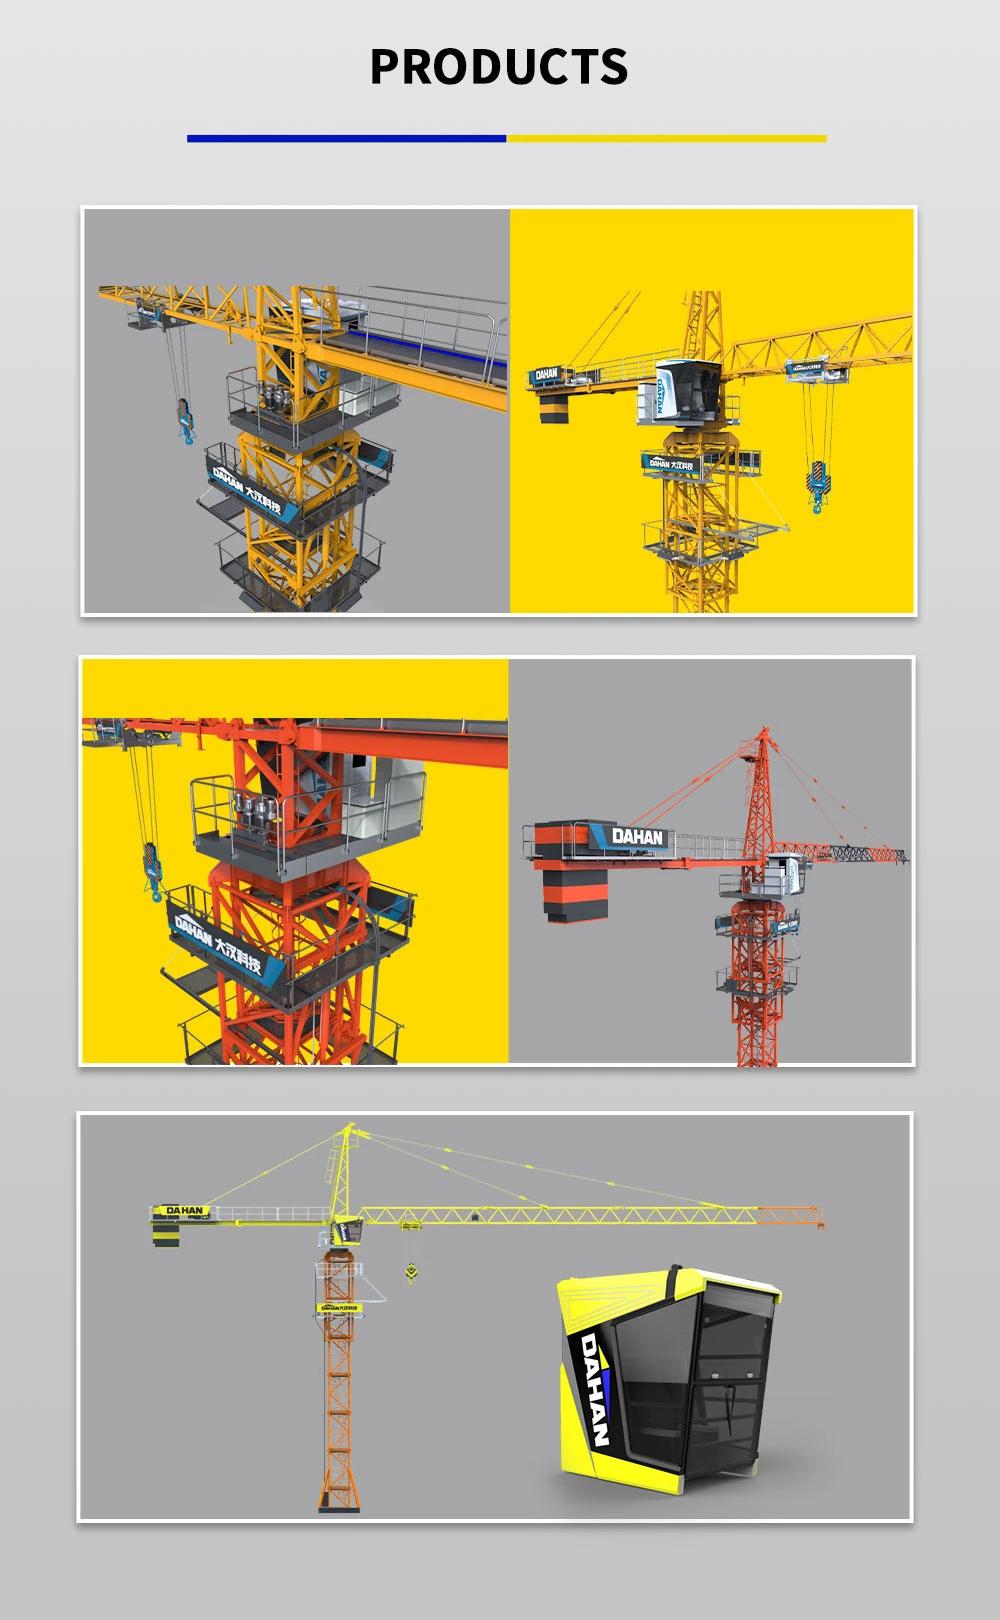 Factory Direct Sales of Small Tower Cranes, Low-Cost Tower Cranes